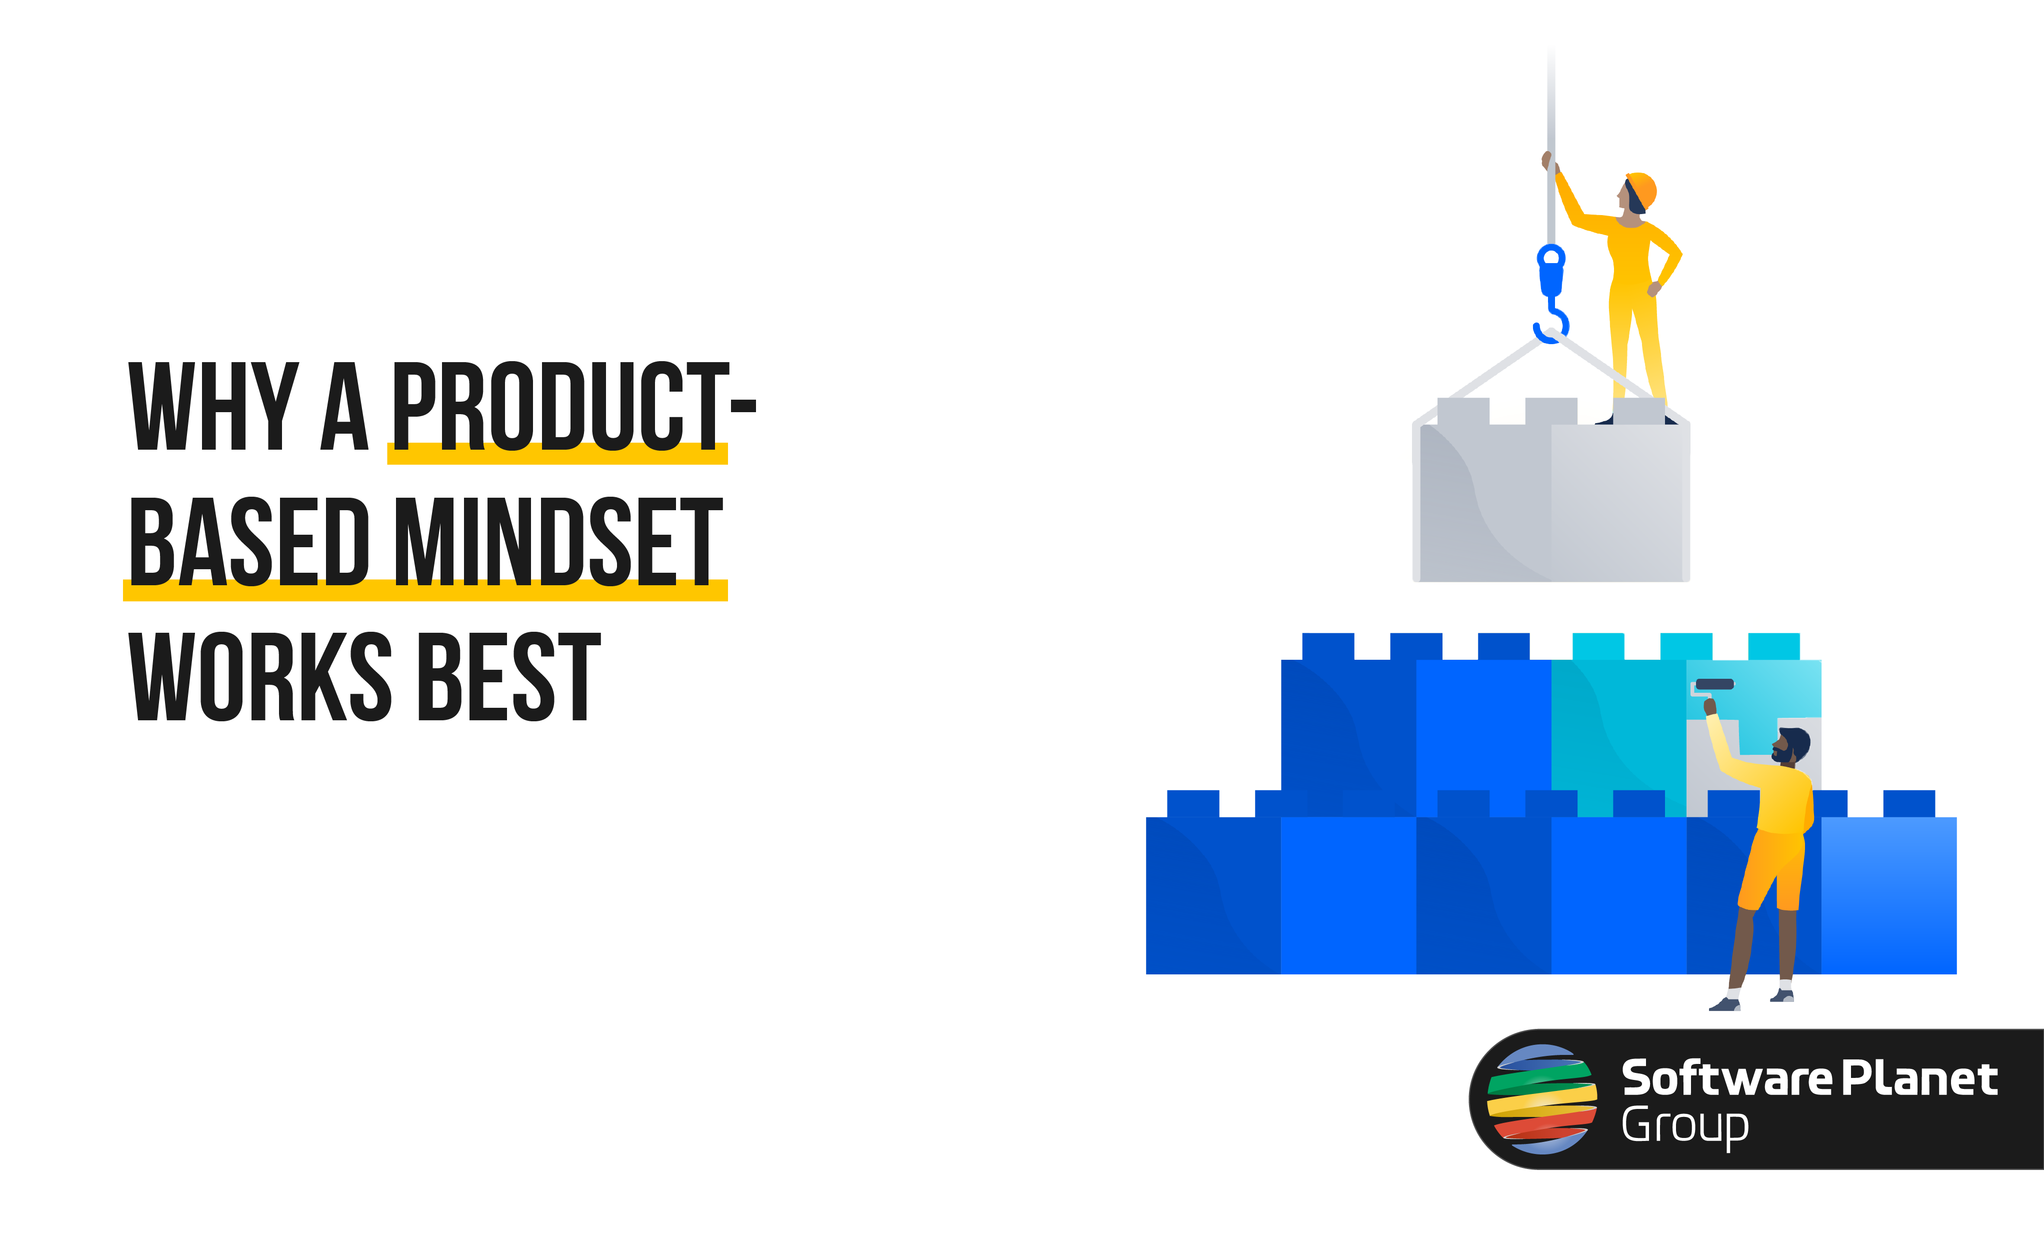 Why a Product-Based Mindset Works Best